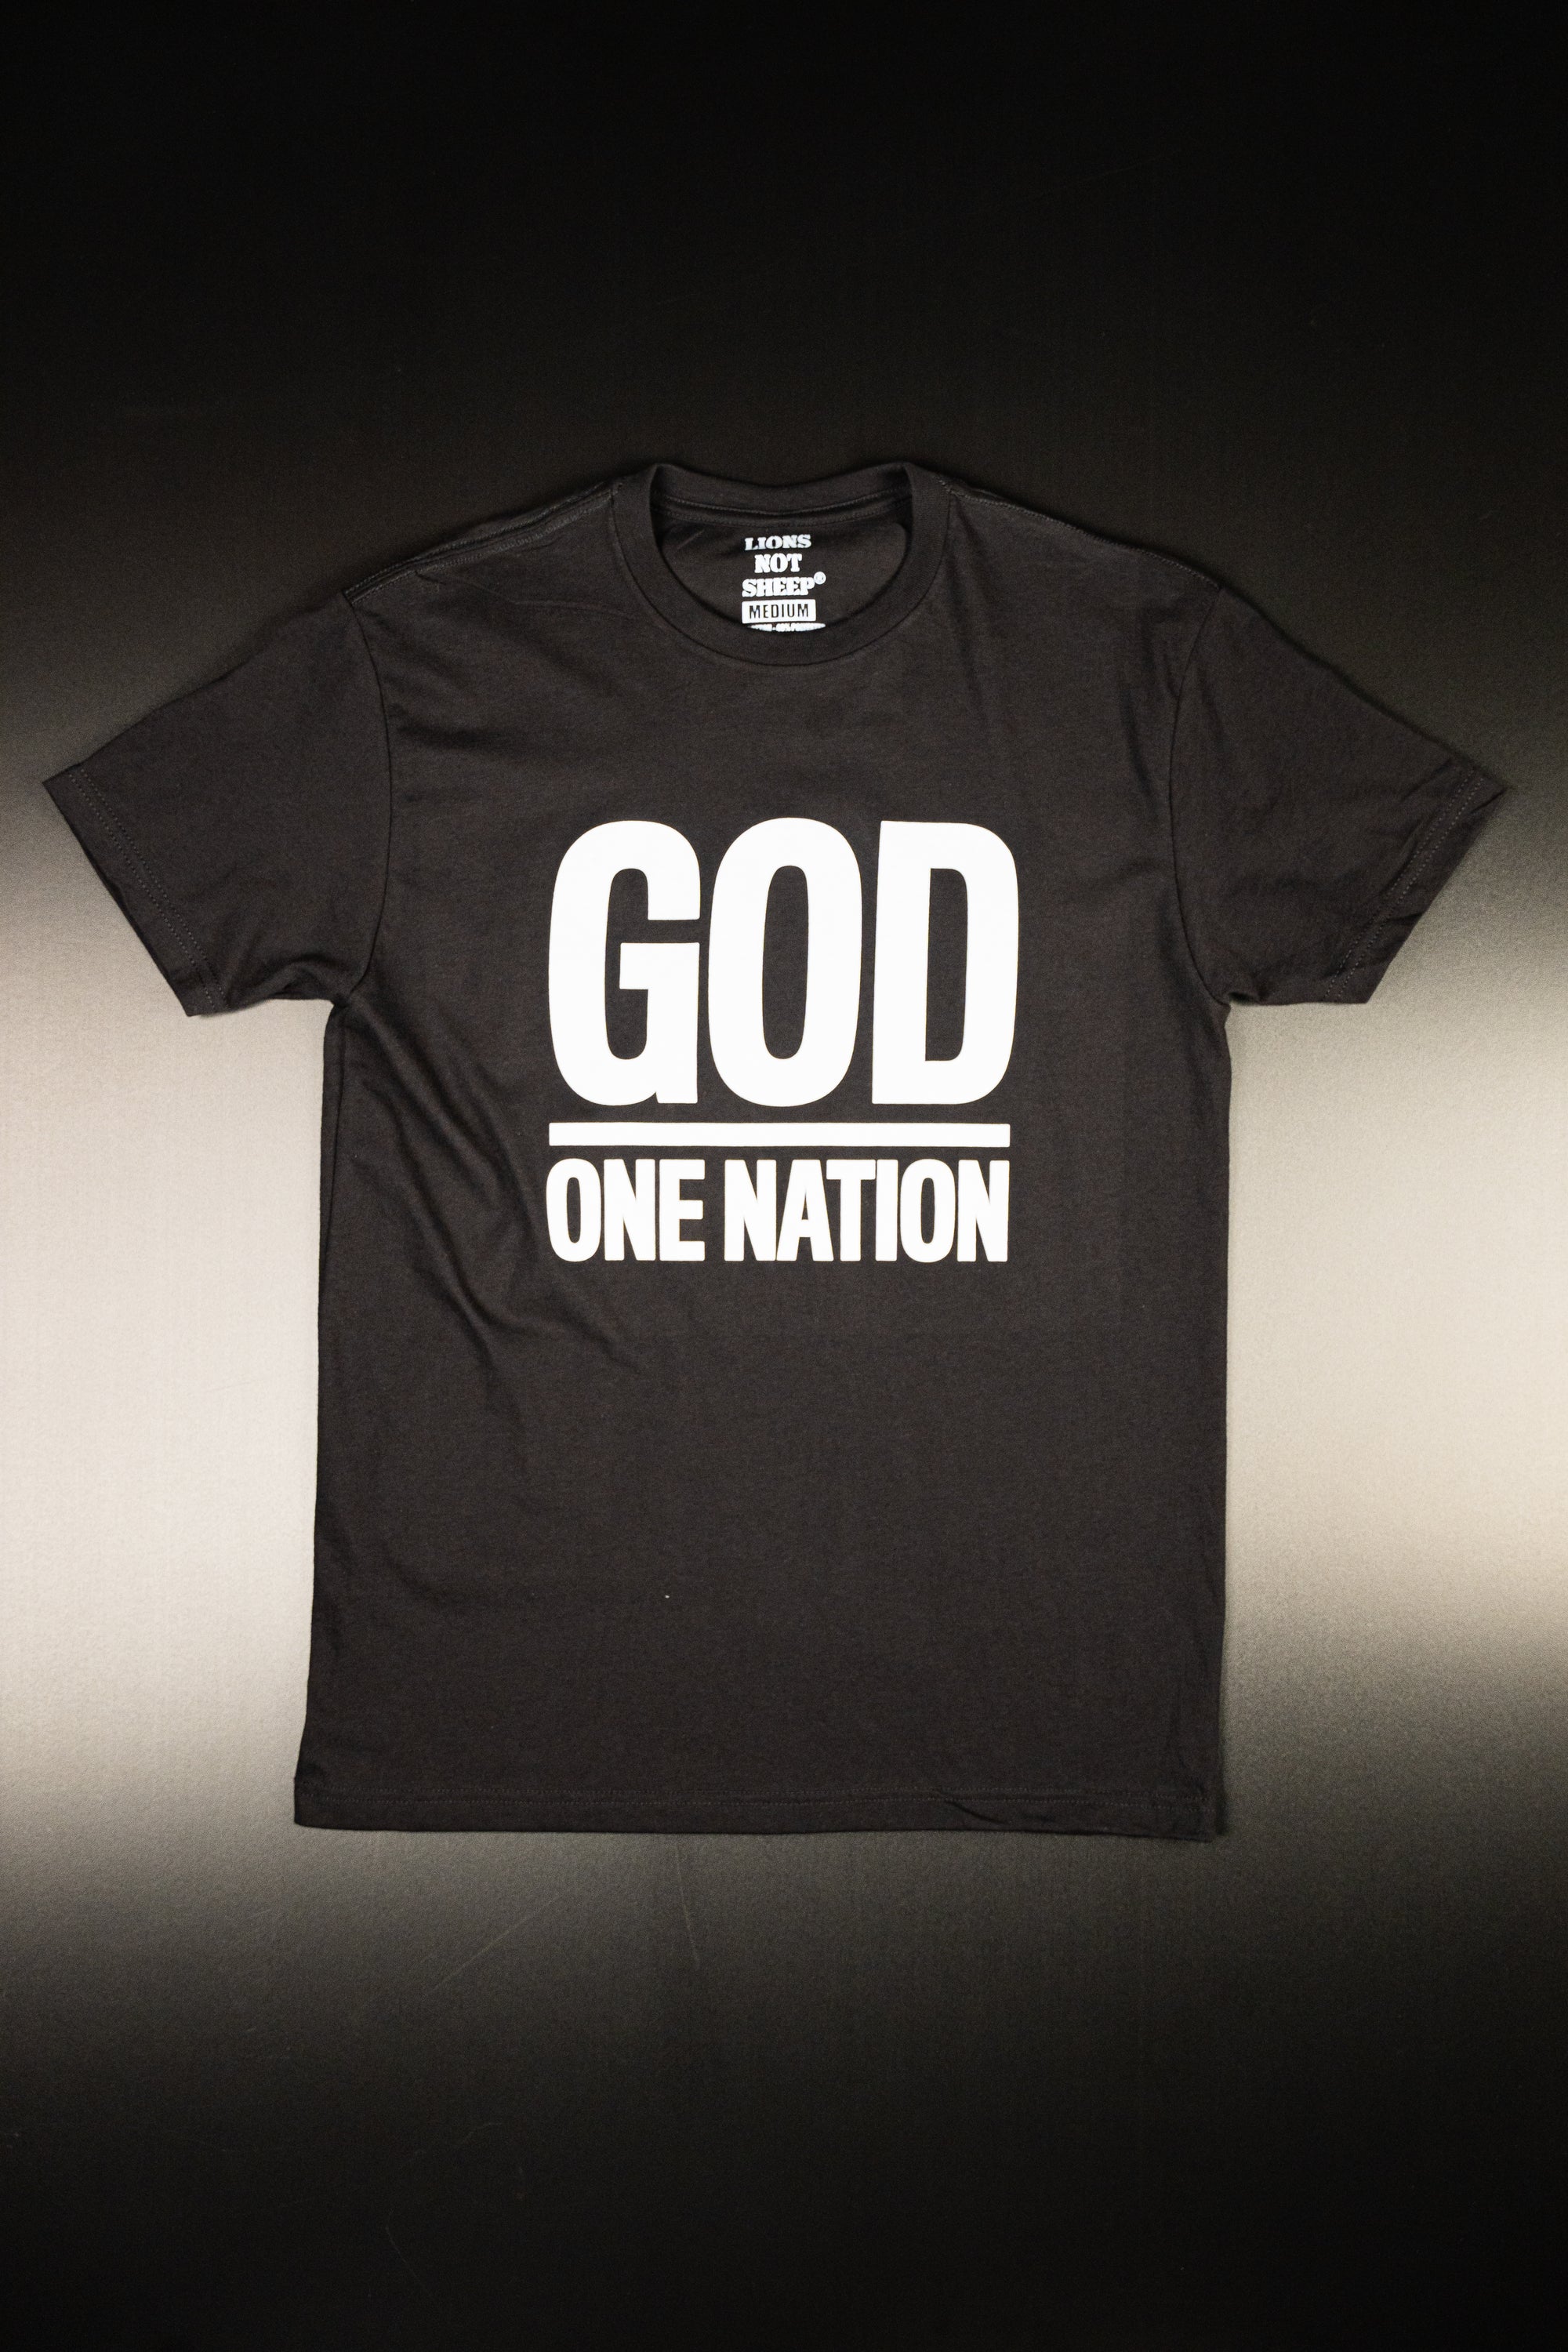 Lions Not Sheep "God's Nation" Tee - Lions Not Sheep ®